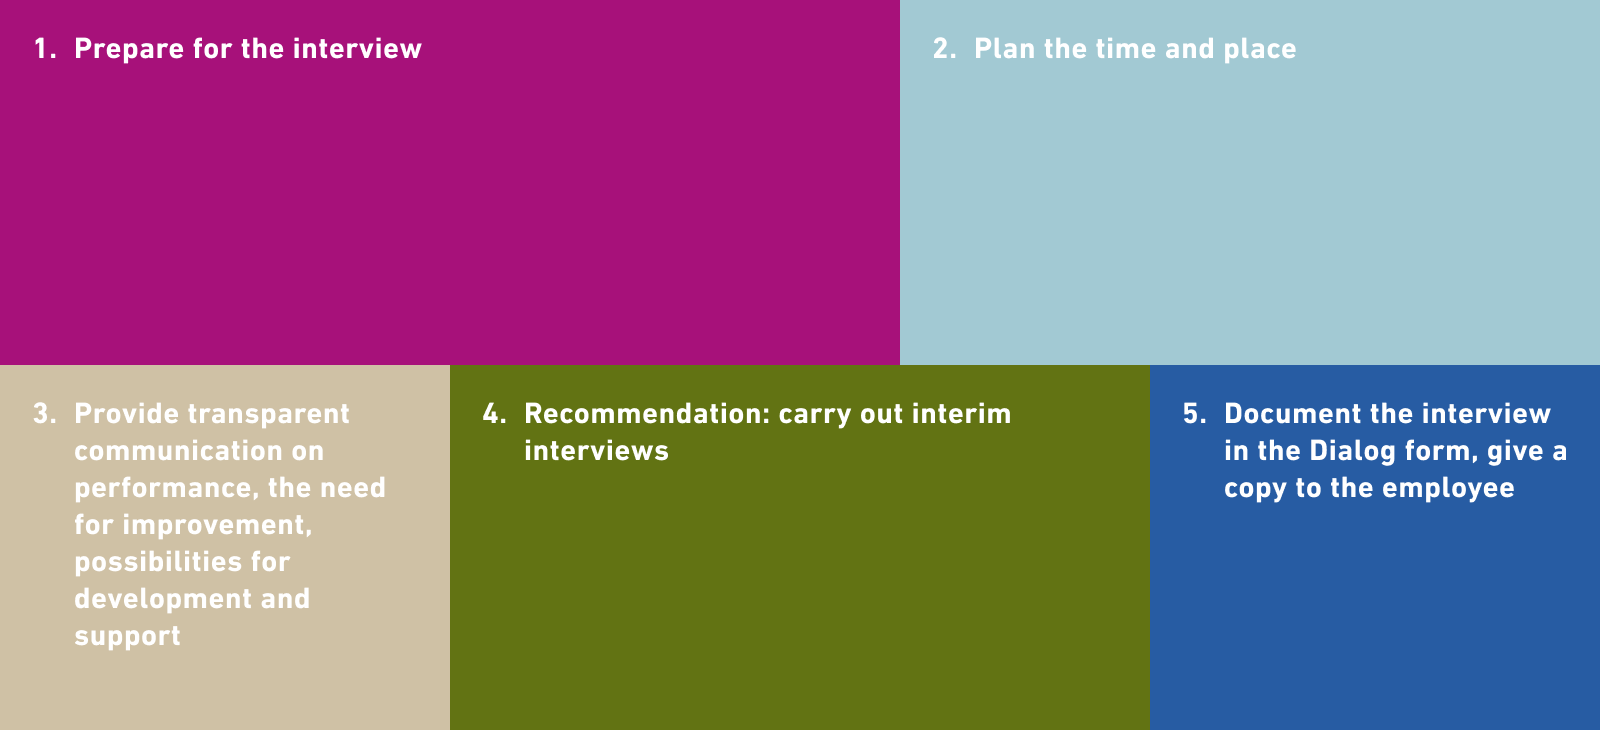 1. Prepare for the interview 2. Schedule the time and venue 3. Provide transparent communication on performance, the need for improvement, possibilities for development and support 4. Recommendation: carry out interim interviews 5. Document the interview in the Dialog form, give a copy to the employee